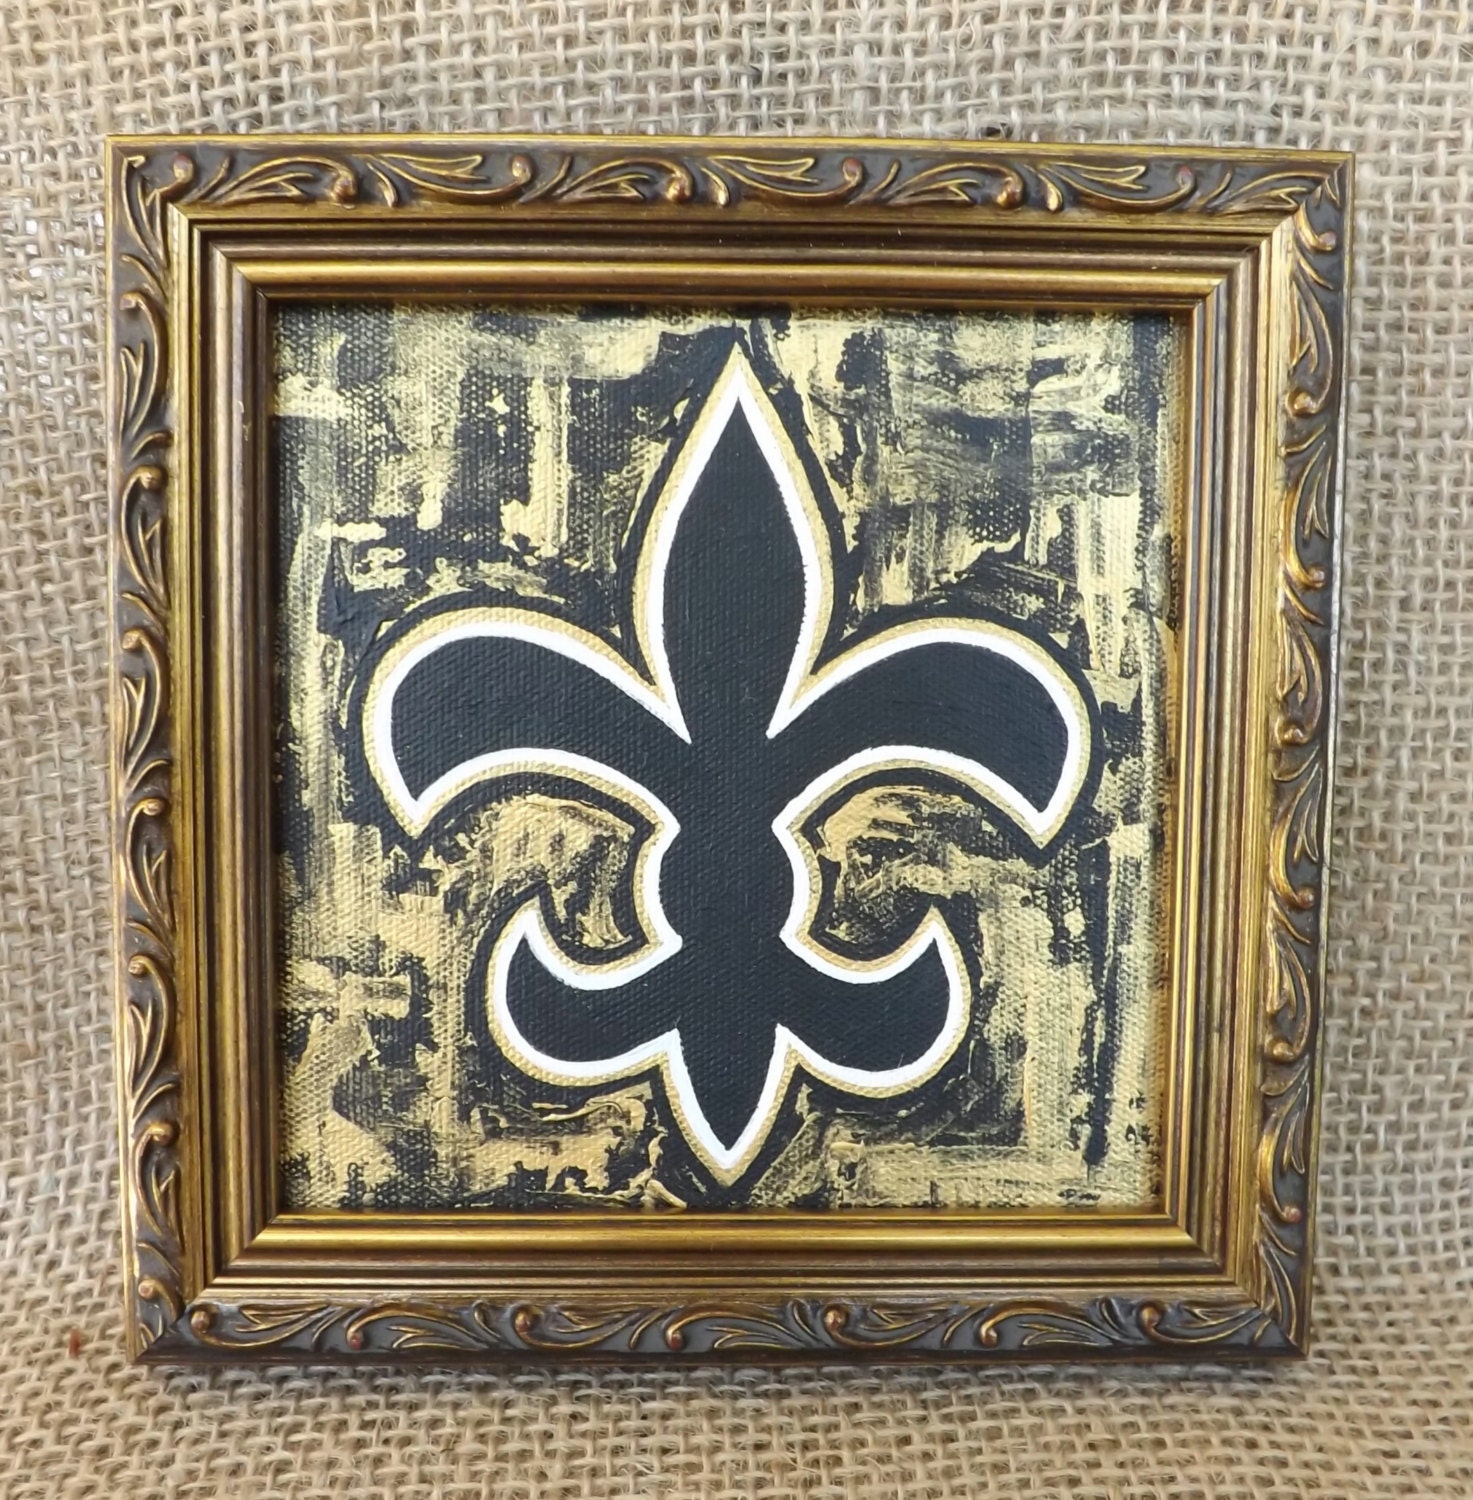 New Orleans Saints Fleur de Lis Painting by StaceyMReilly on Etsy